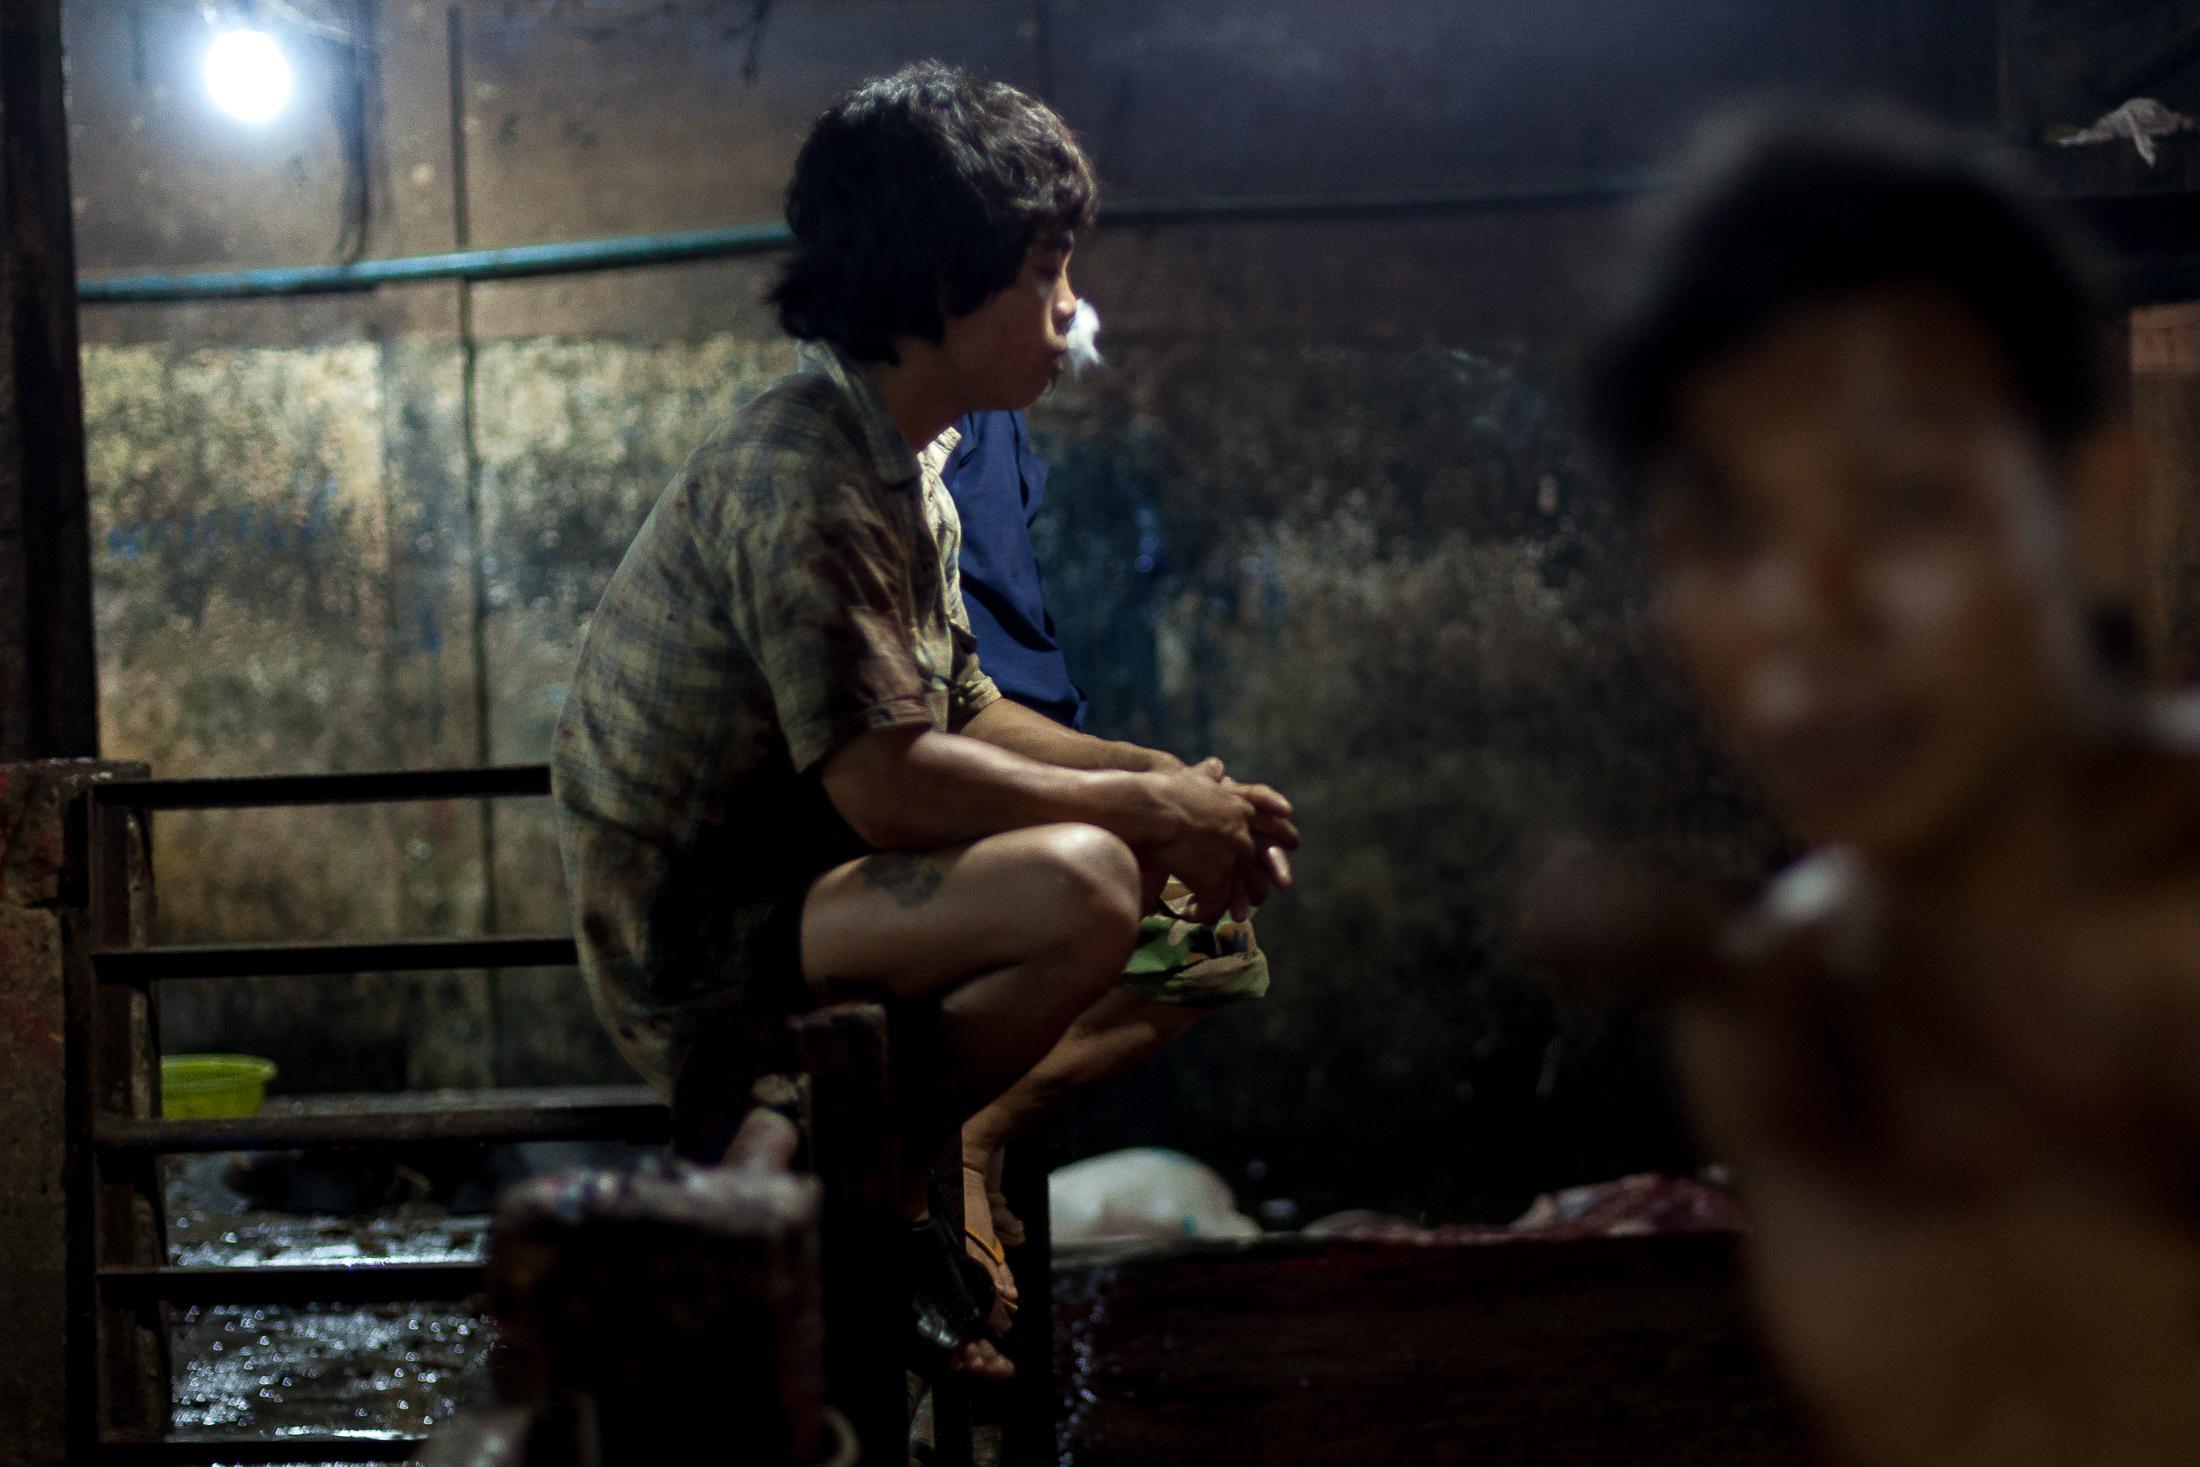 Inside a Cambodian Slaughterhouse - SIEM REAP, CAMBODIA - FEBRUARY 22: A young worker smokes...